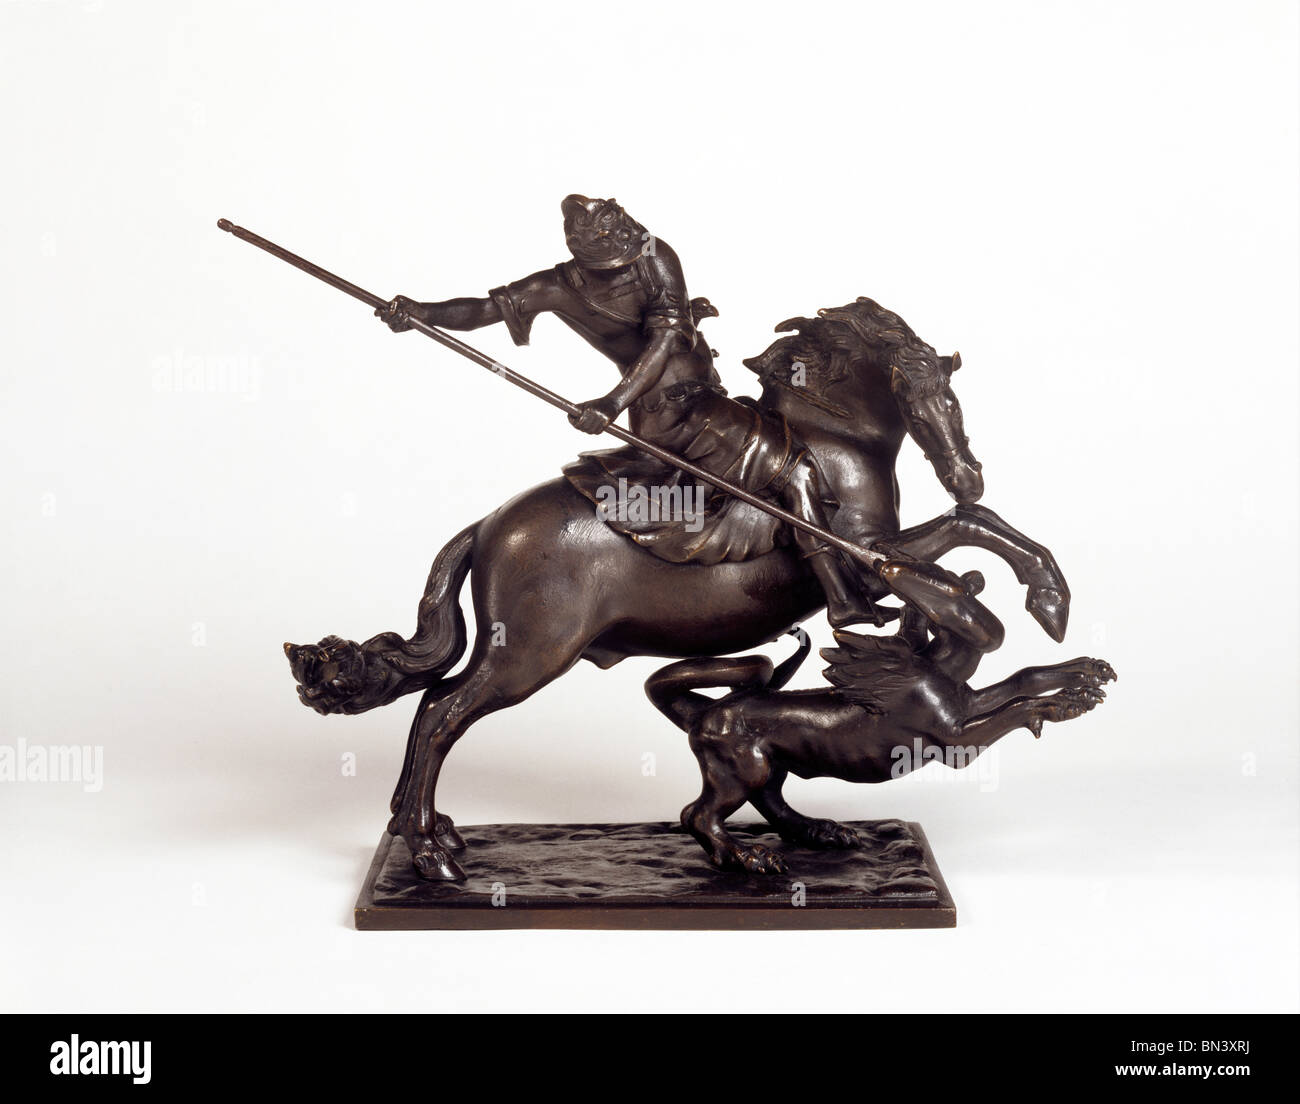 St. George & the Dragon statuette, made by Francesco Fanelli. London, England, early 17th century Stock Photo